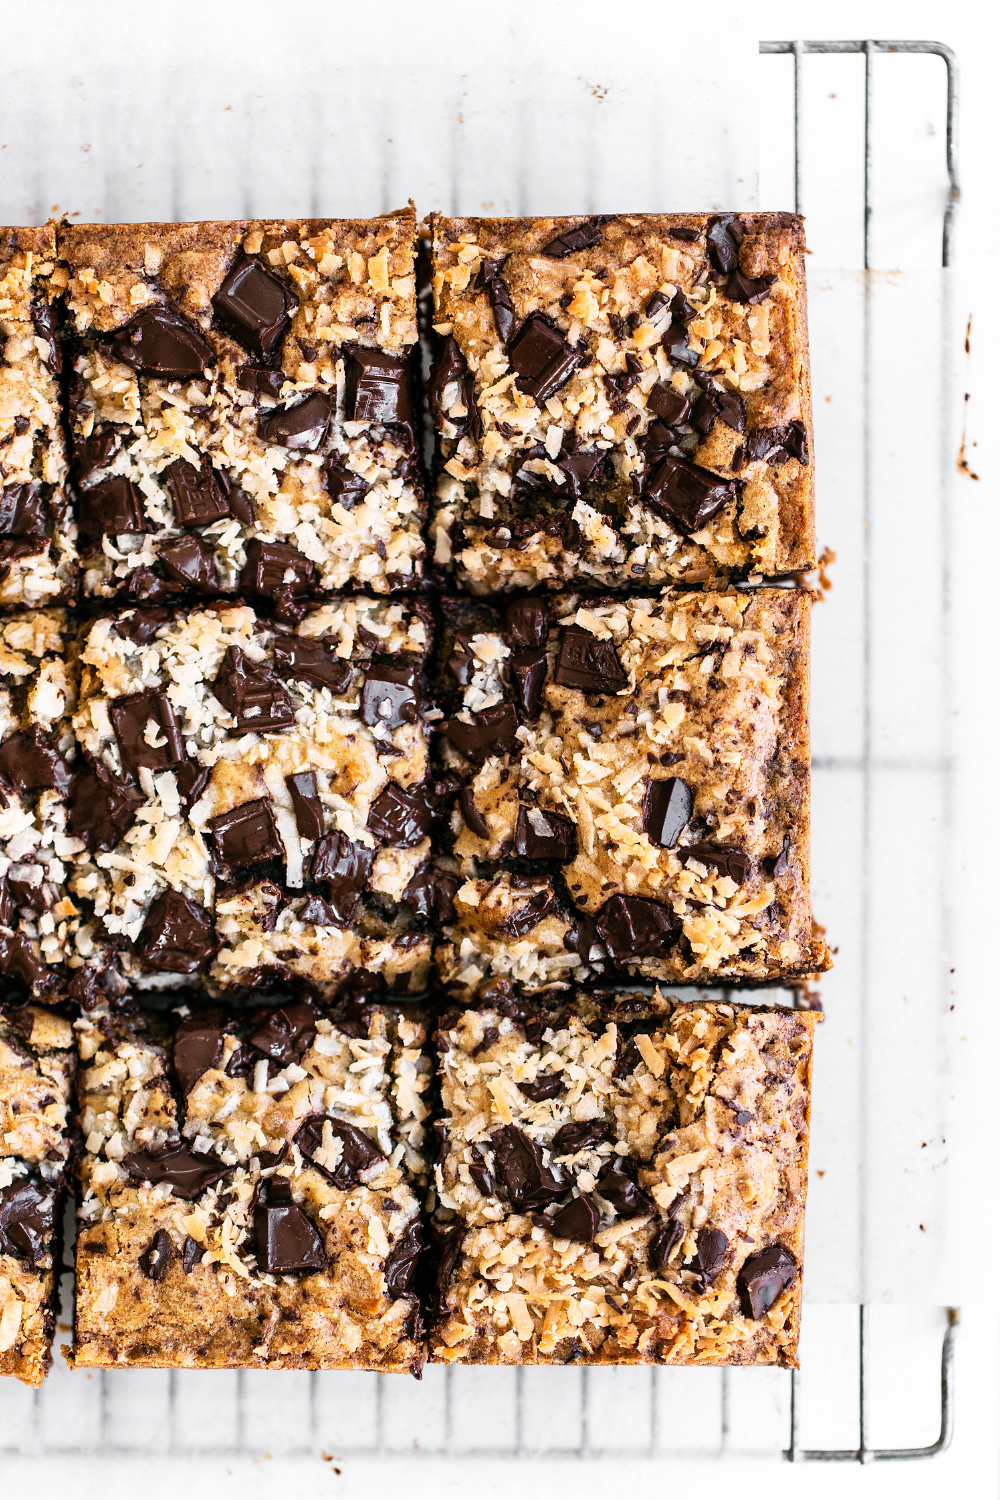 the whole pan of Chocolate Coconut Blondies.